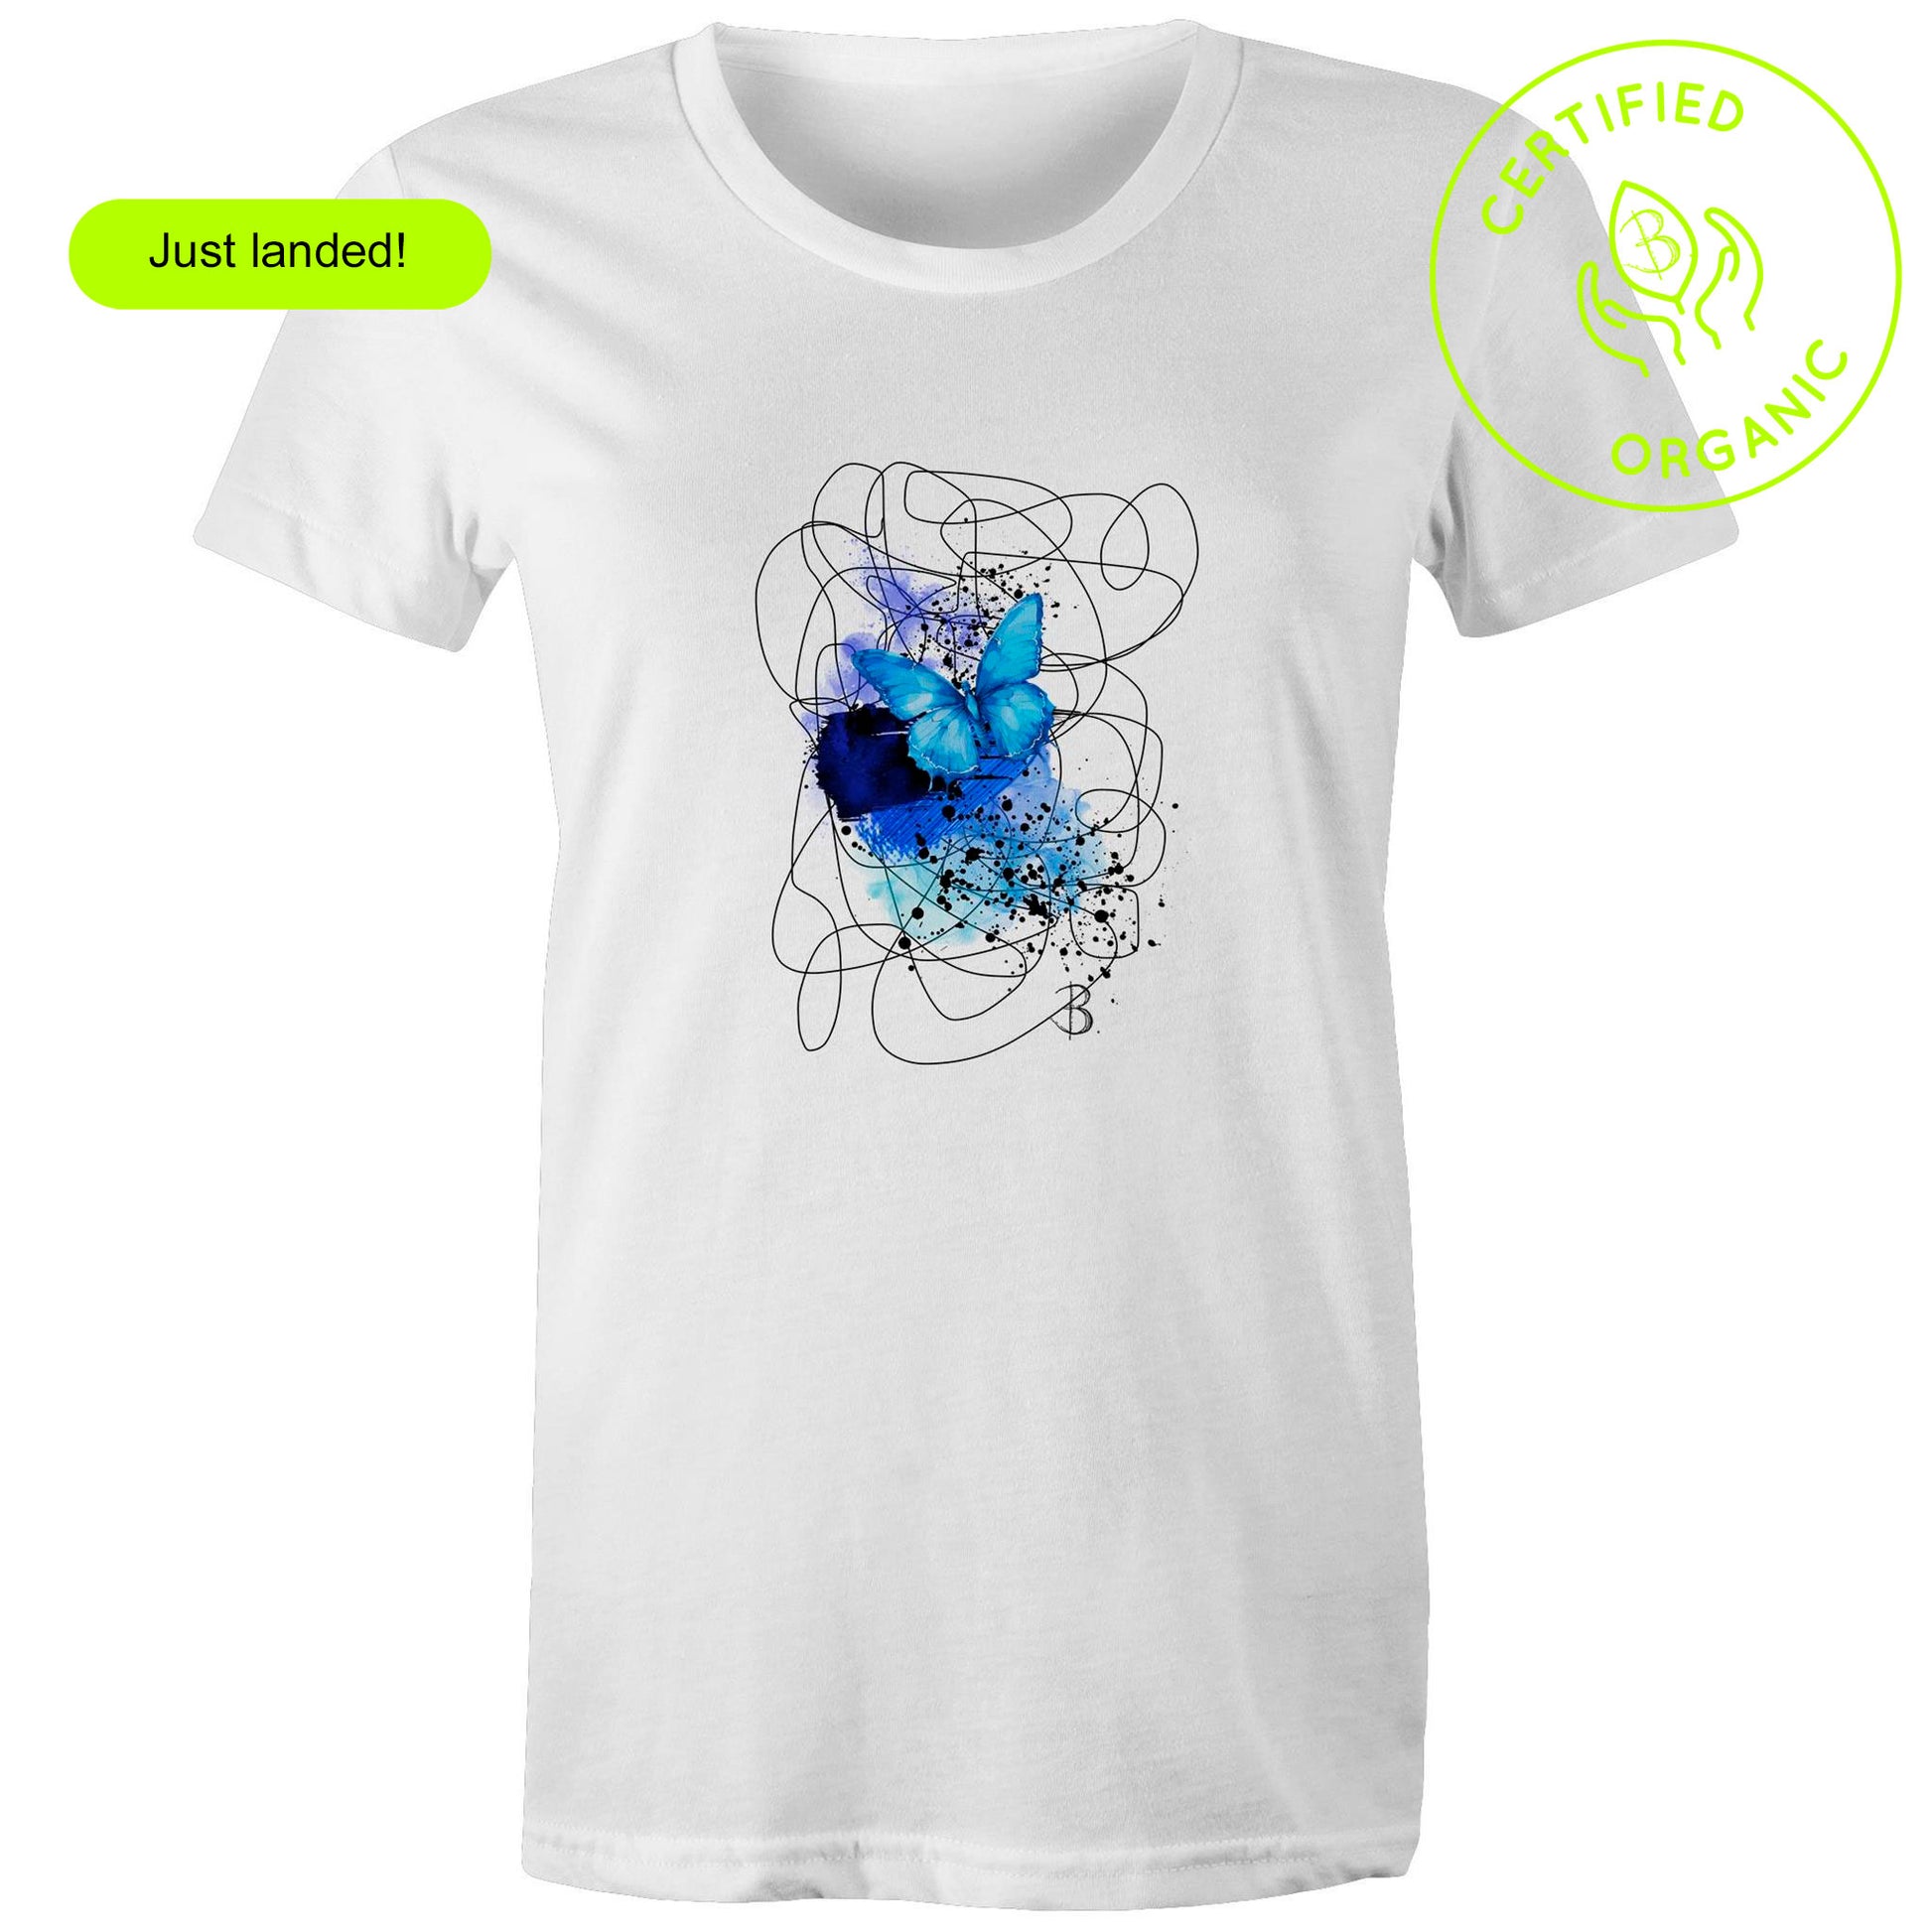 'Swatch Blue Women's Organic Tee' in White with Exclusive Print of a Blue Butterfly, designed by Bridget Bradley for B. Streetwear. Learn more